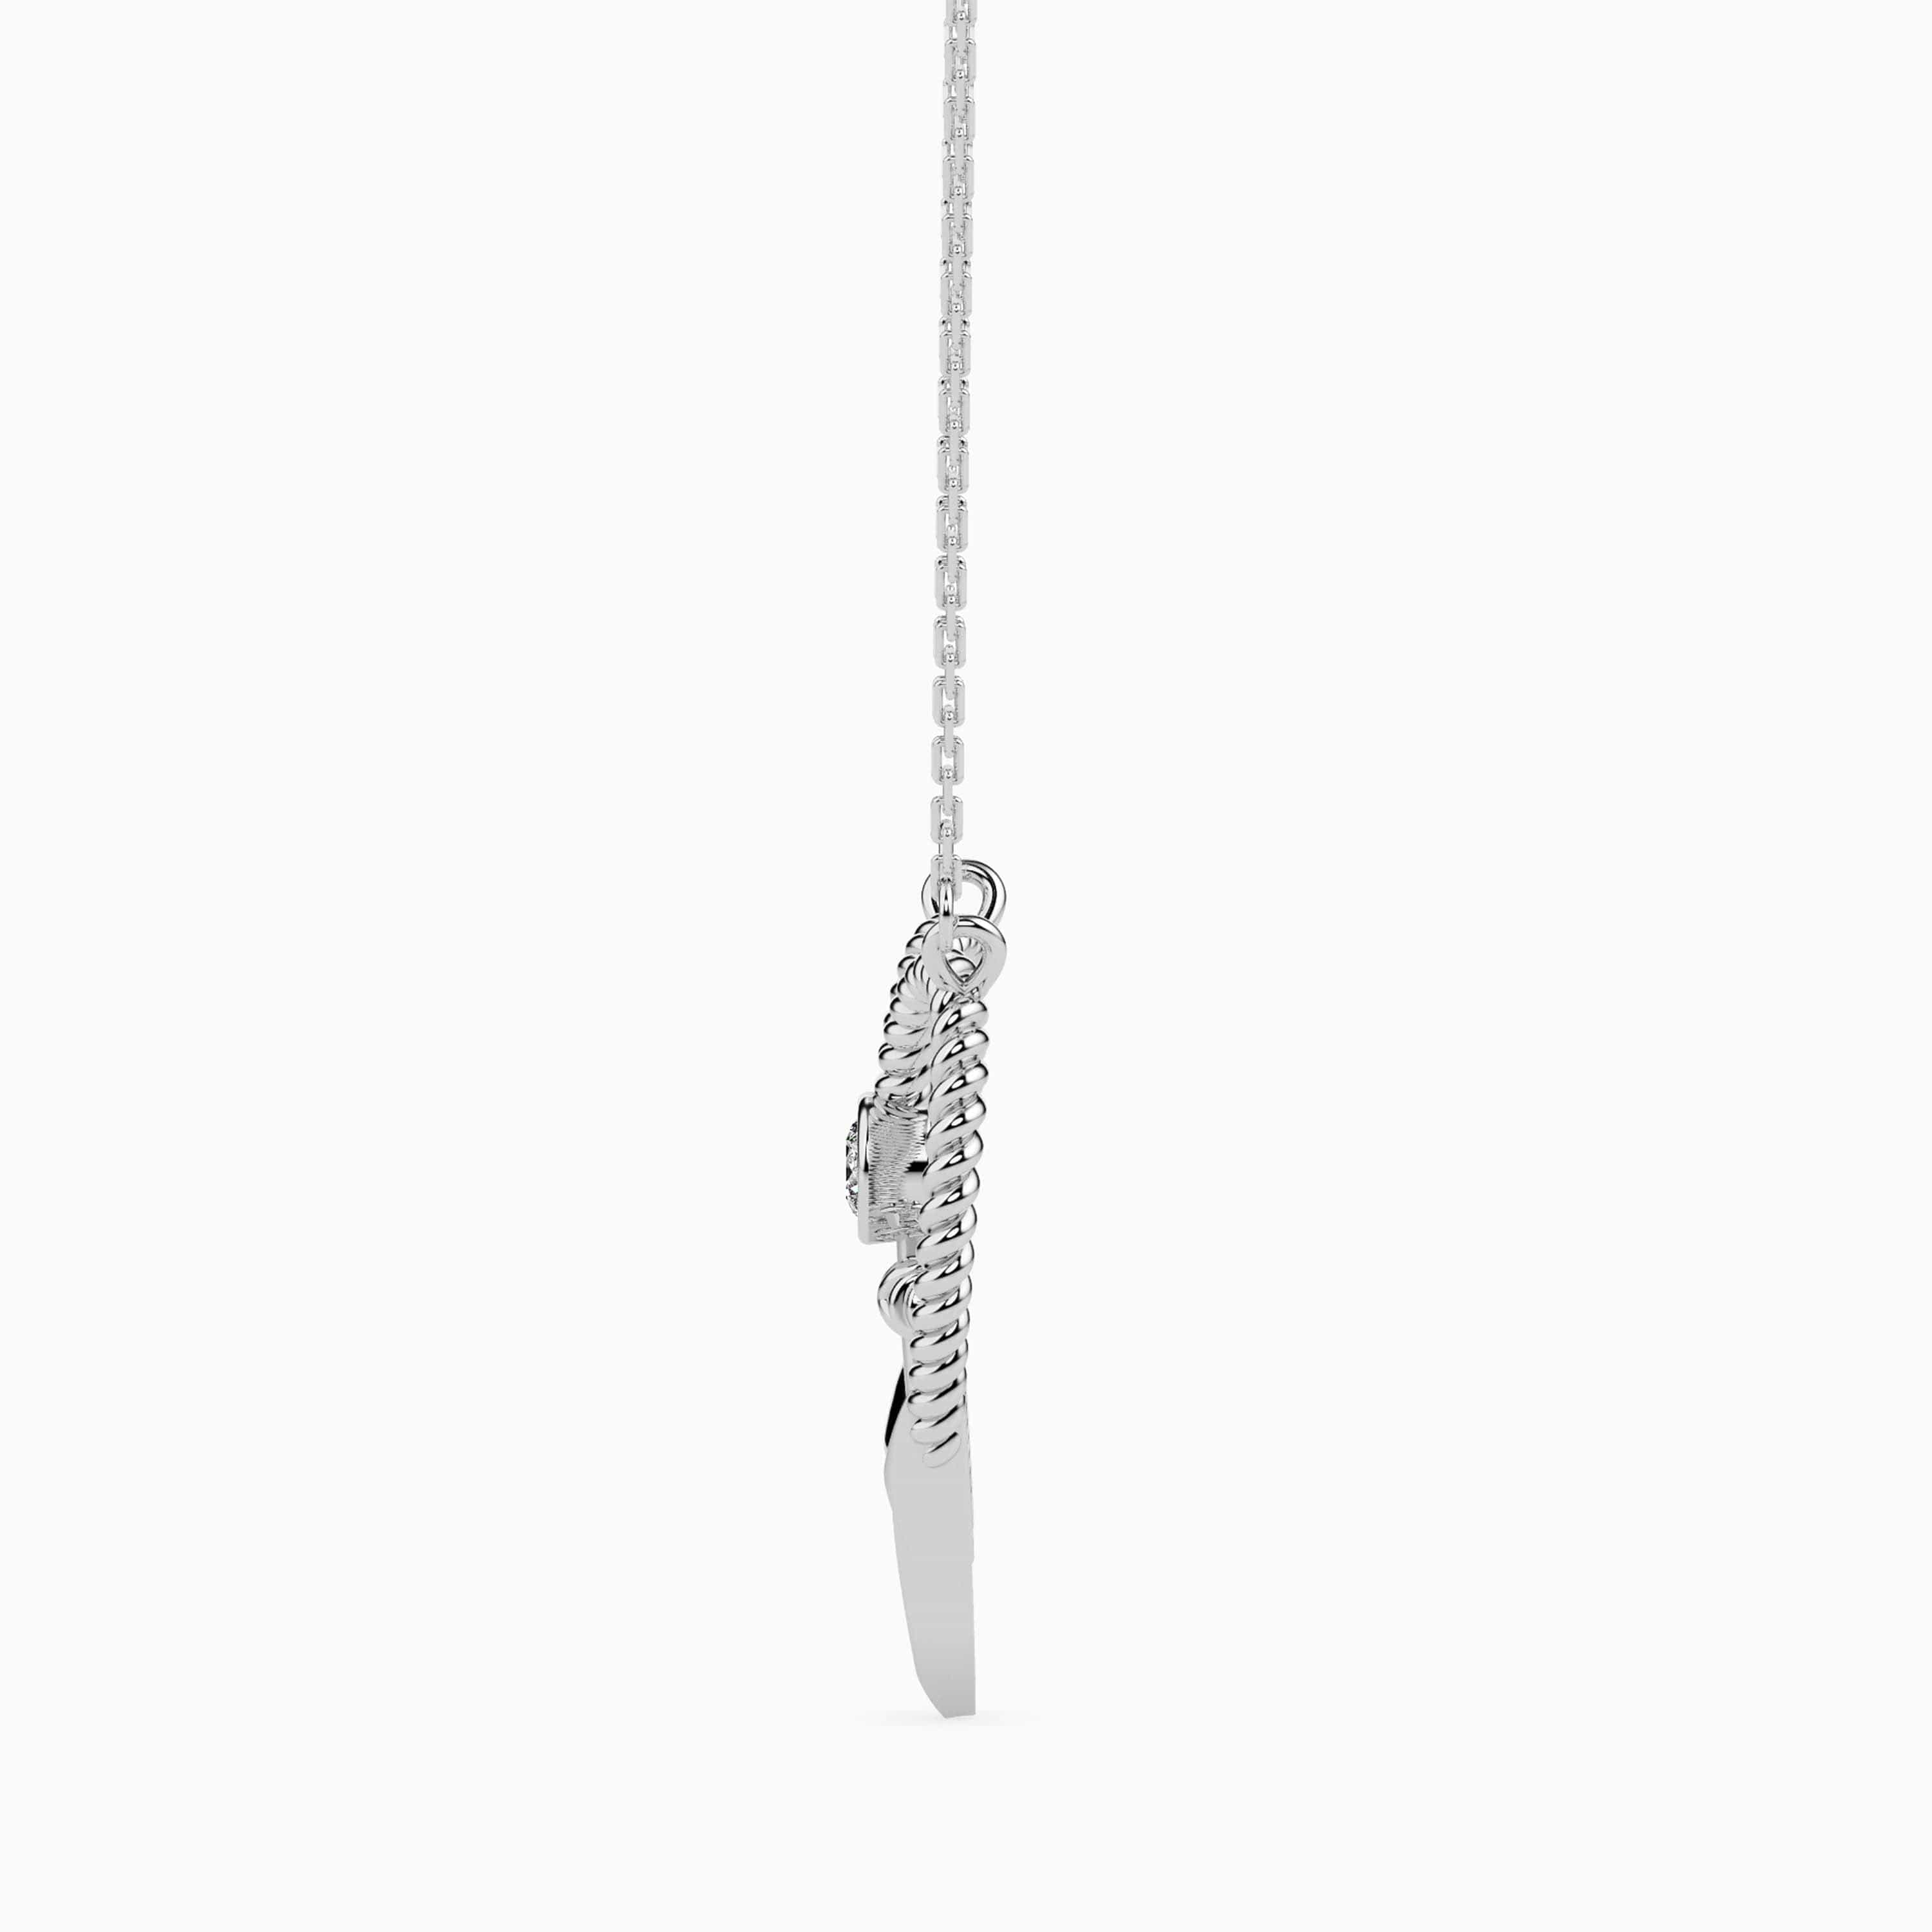 1.33cts Genuine Pave Diamond Pendant, Diamond Feather Jewelry, Sterling  Silver, Leaf Diamond Jewelry, 16 Chain Leaf Pendant Necklace, Gifts - Etsy  UK | Diamond pendant, Feather jewelry, Pave diamond jewelry